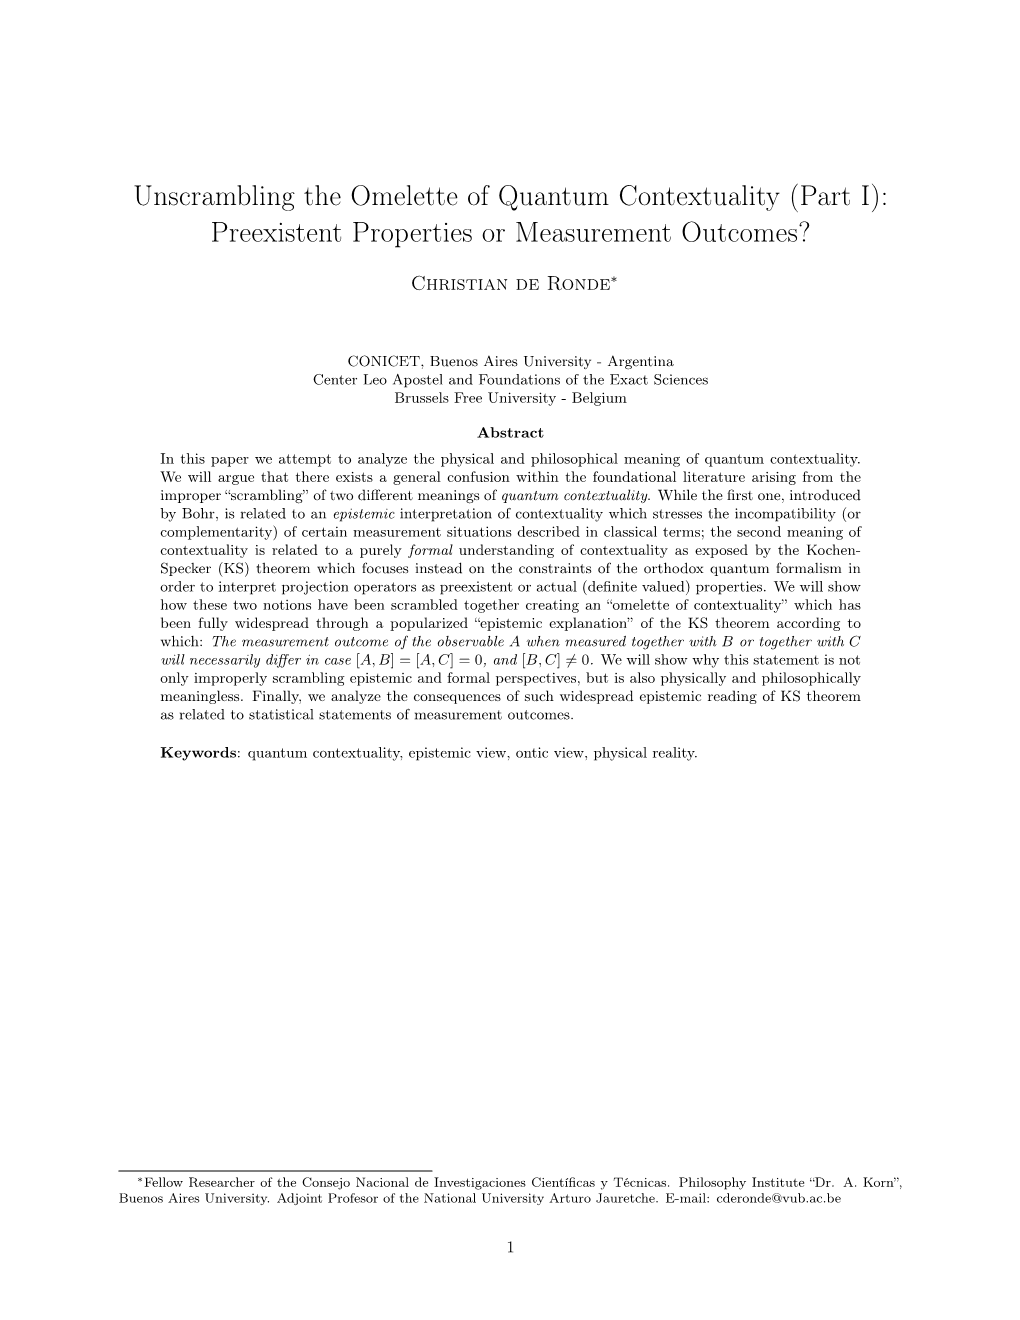 Unscrambling the Omelette of Quantum Contextuality (Part I): Preexistent Properties Or Measurement Outcomes?